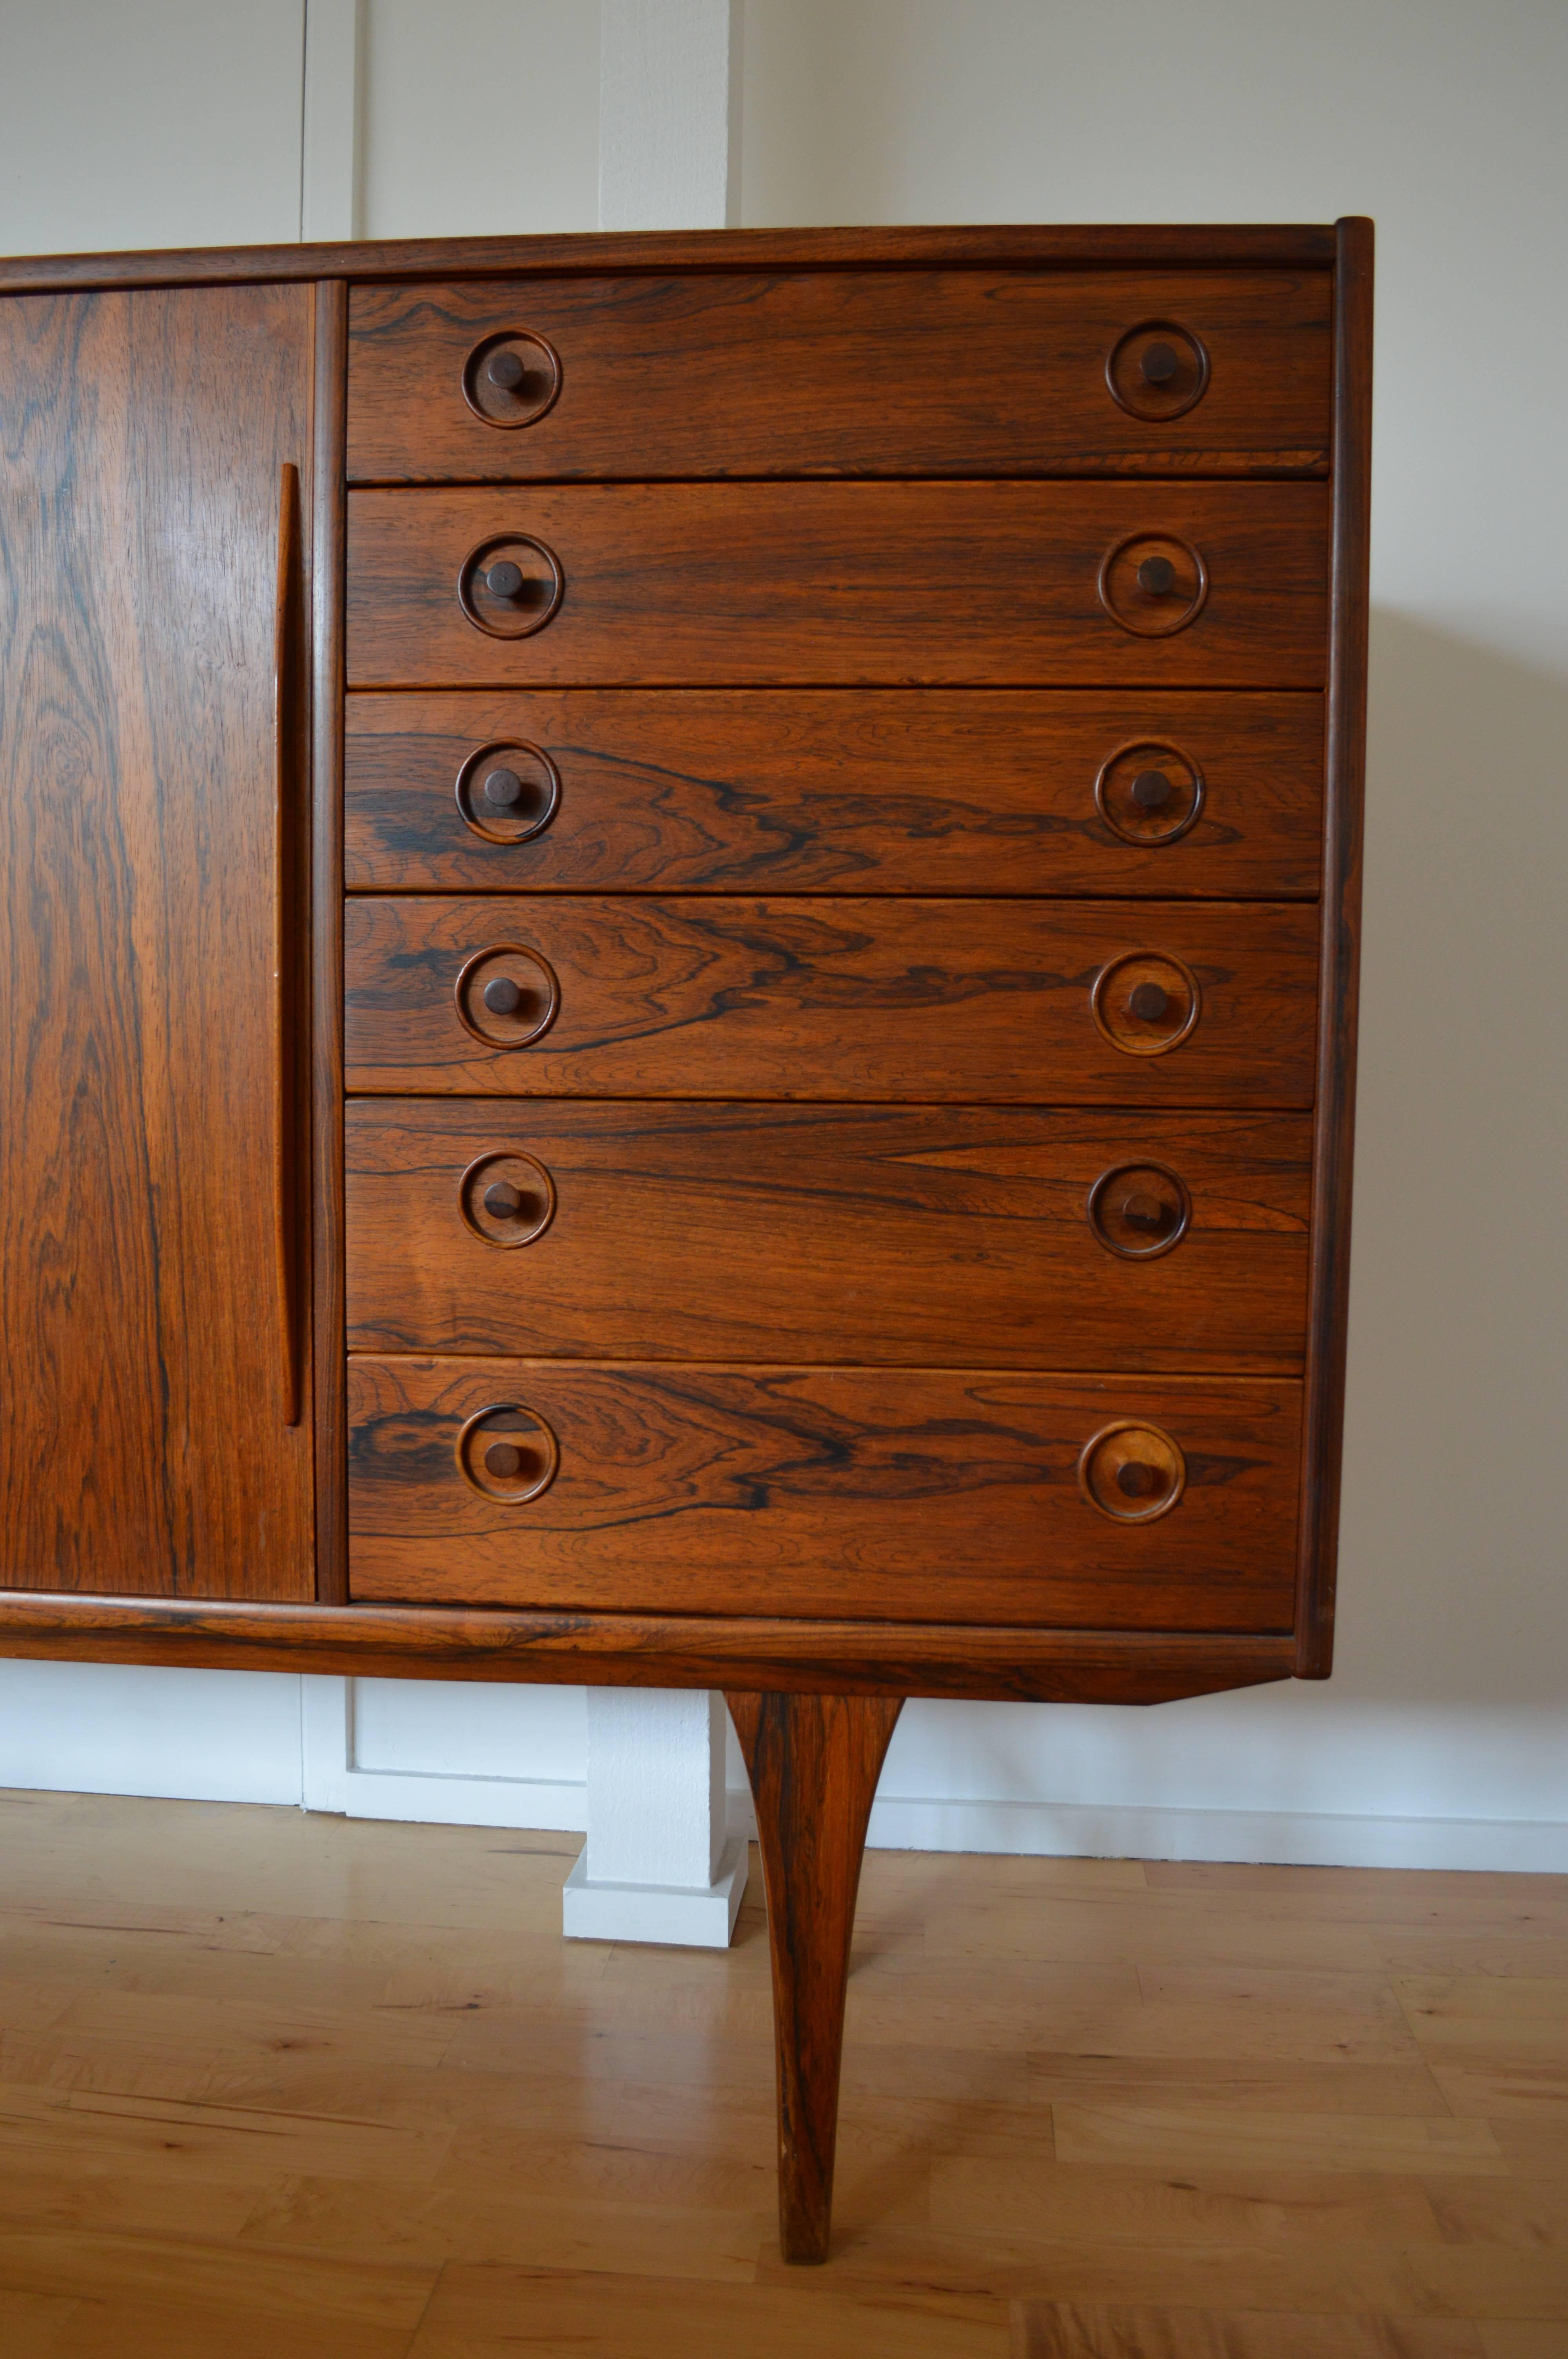 A stunningly beautiful grain on this piece, very much in the style of H.W. Klein but equally of the same age with gorgeous turned handles on the drawers and solid rosewood legs.

Sturdy yet super-stylish, the credenza has six drawers on the right